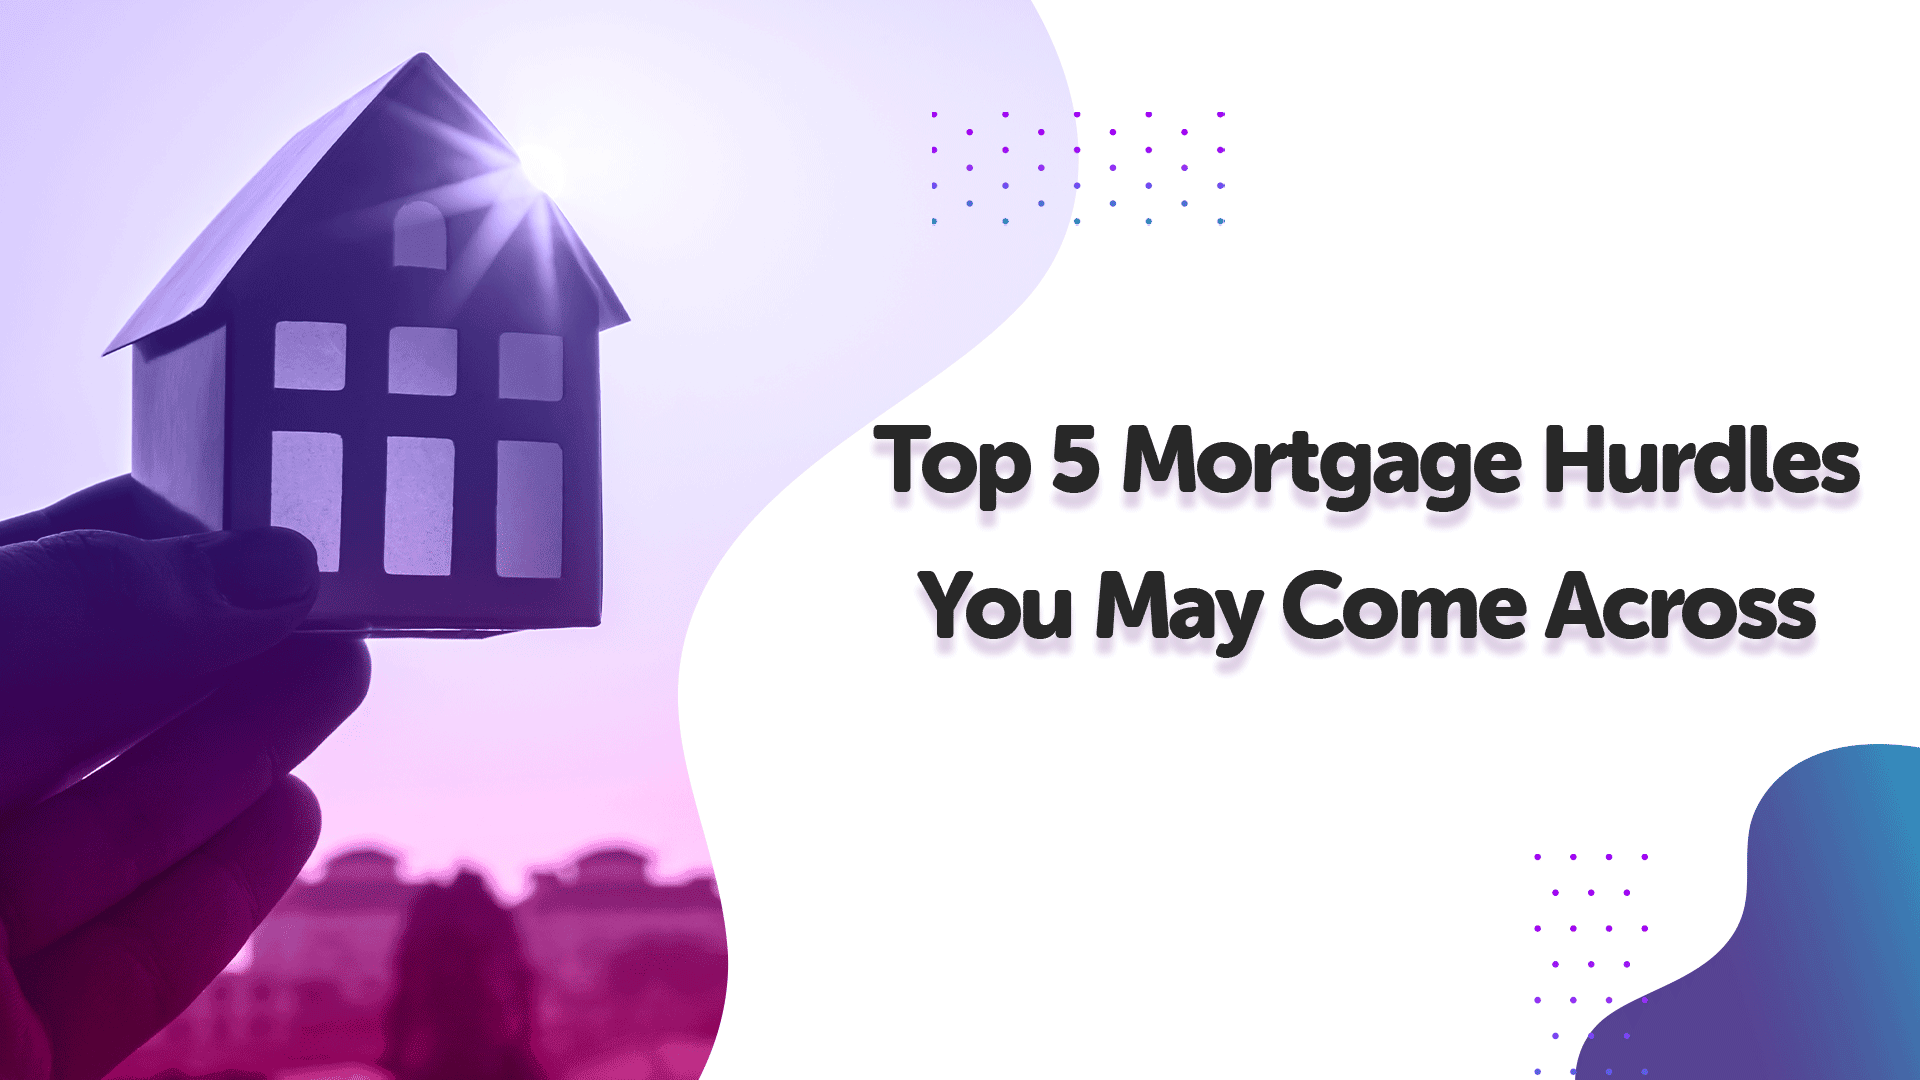 Top 5 Mortgage Hurdles You May Come Across in Bristol